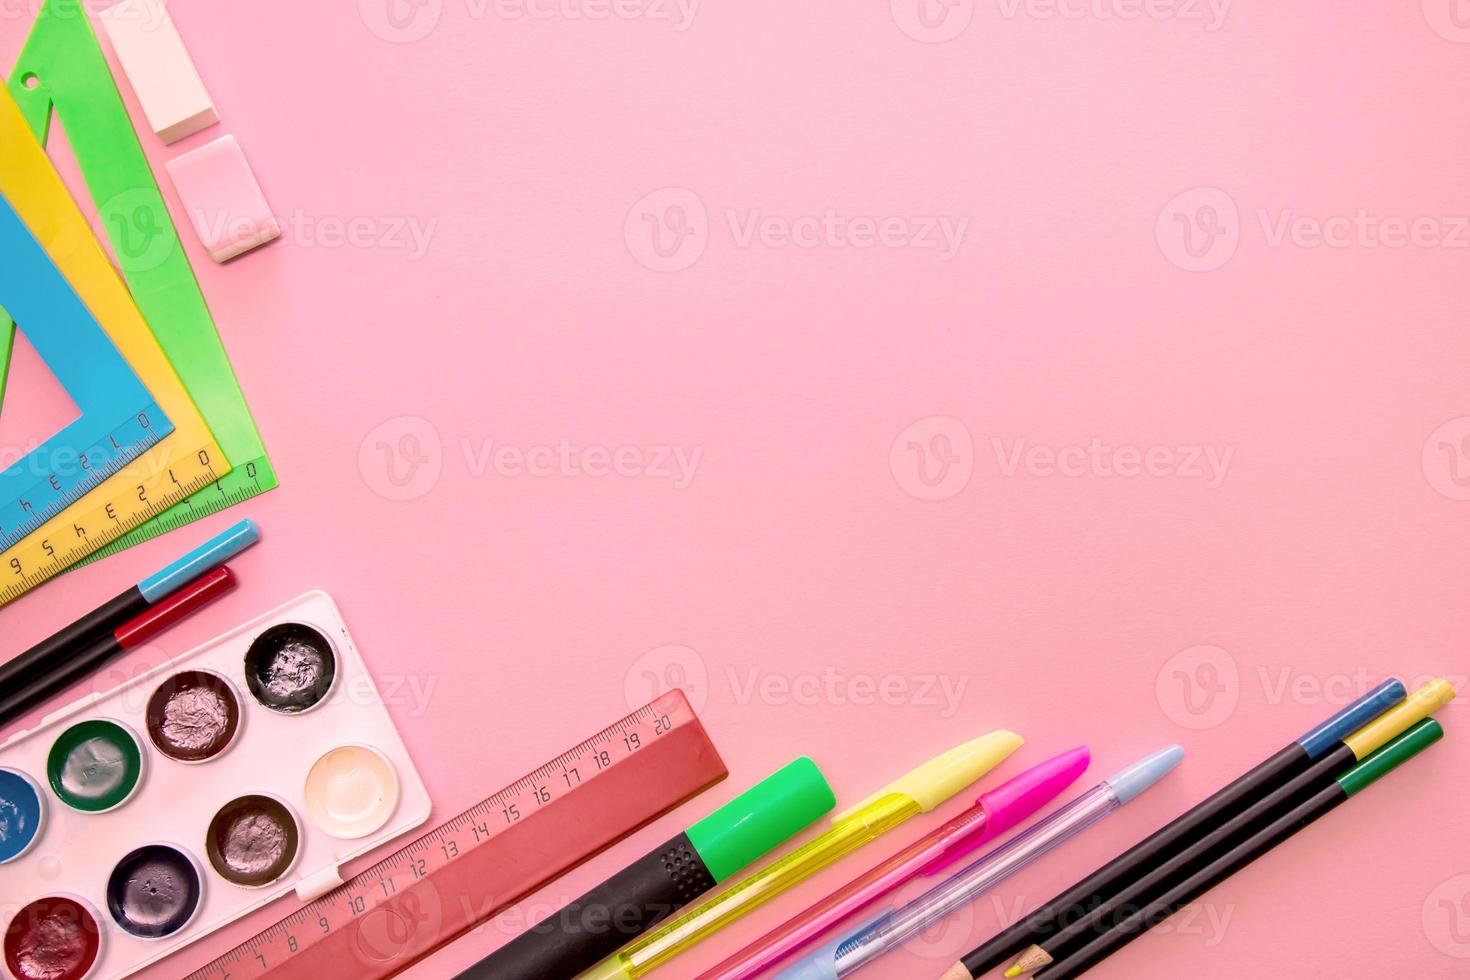 Pink and Yellow School Supplies on Pink Background. Back To School